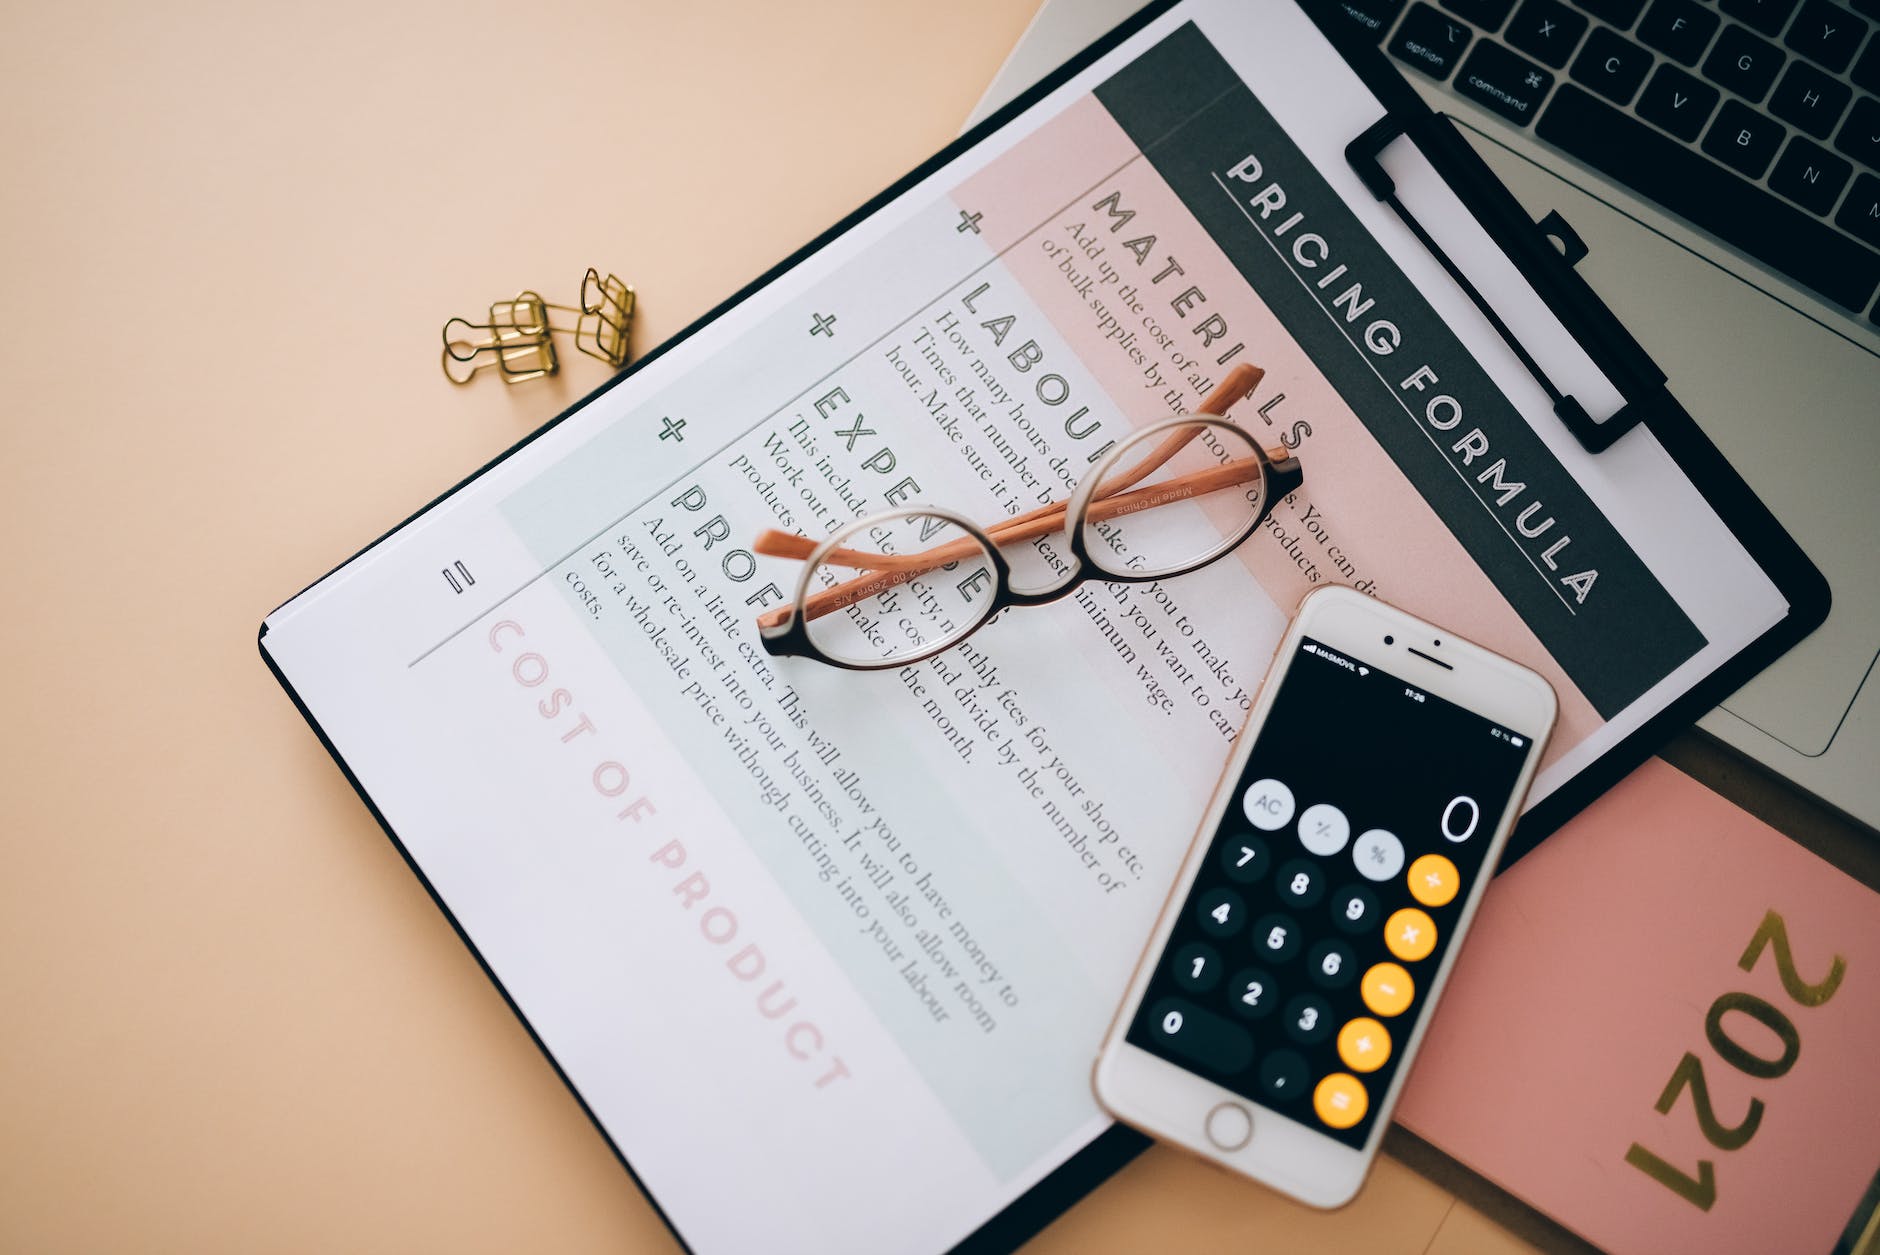 a phone calculator near the eyeglasses on clipboard with white paper